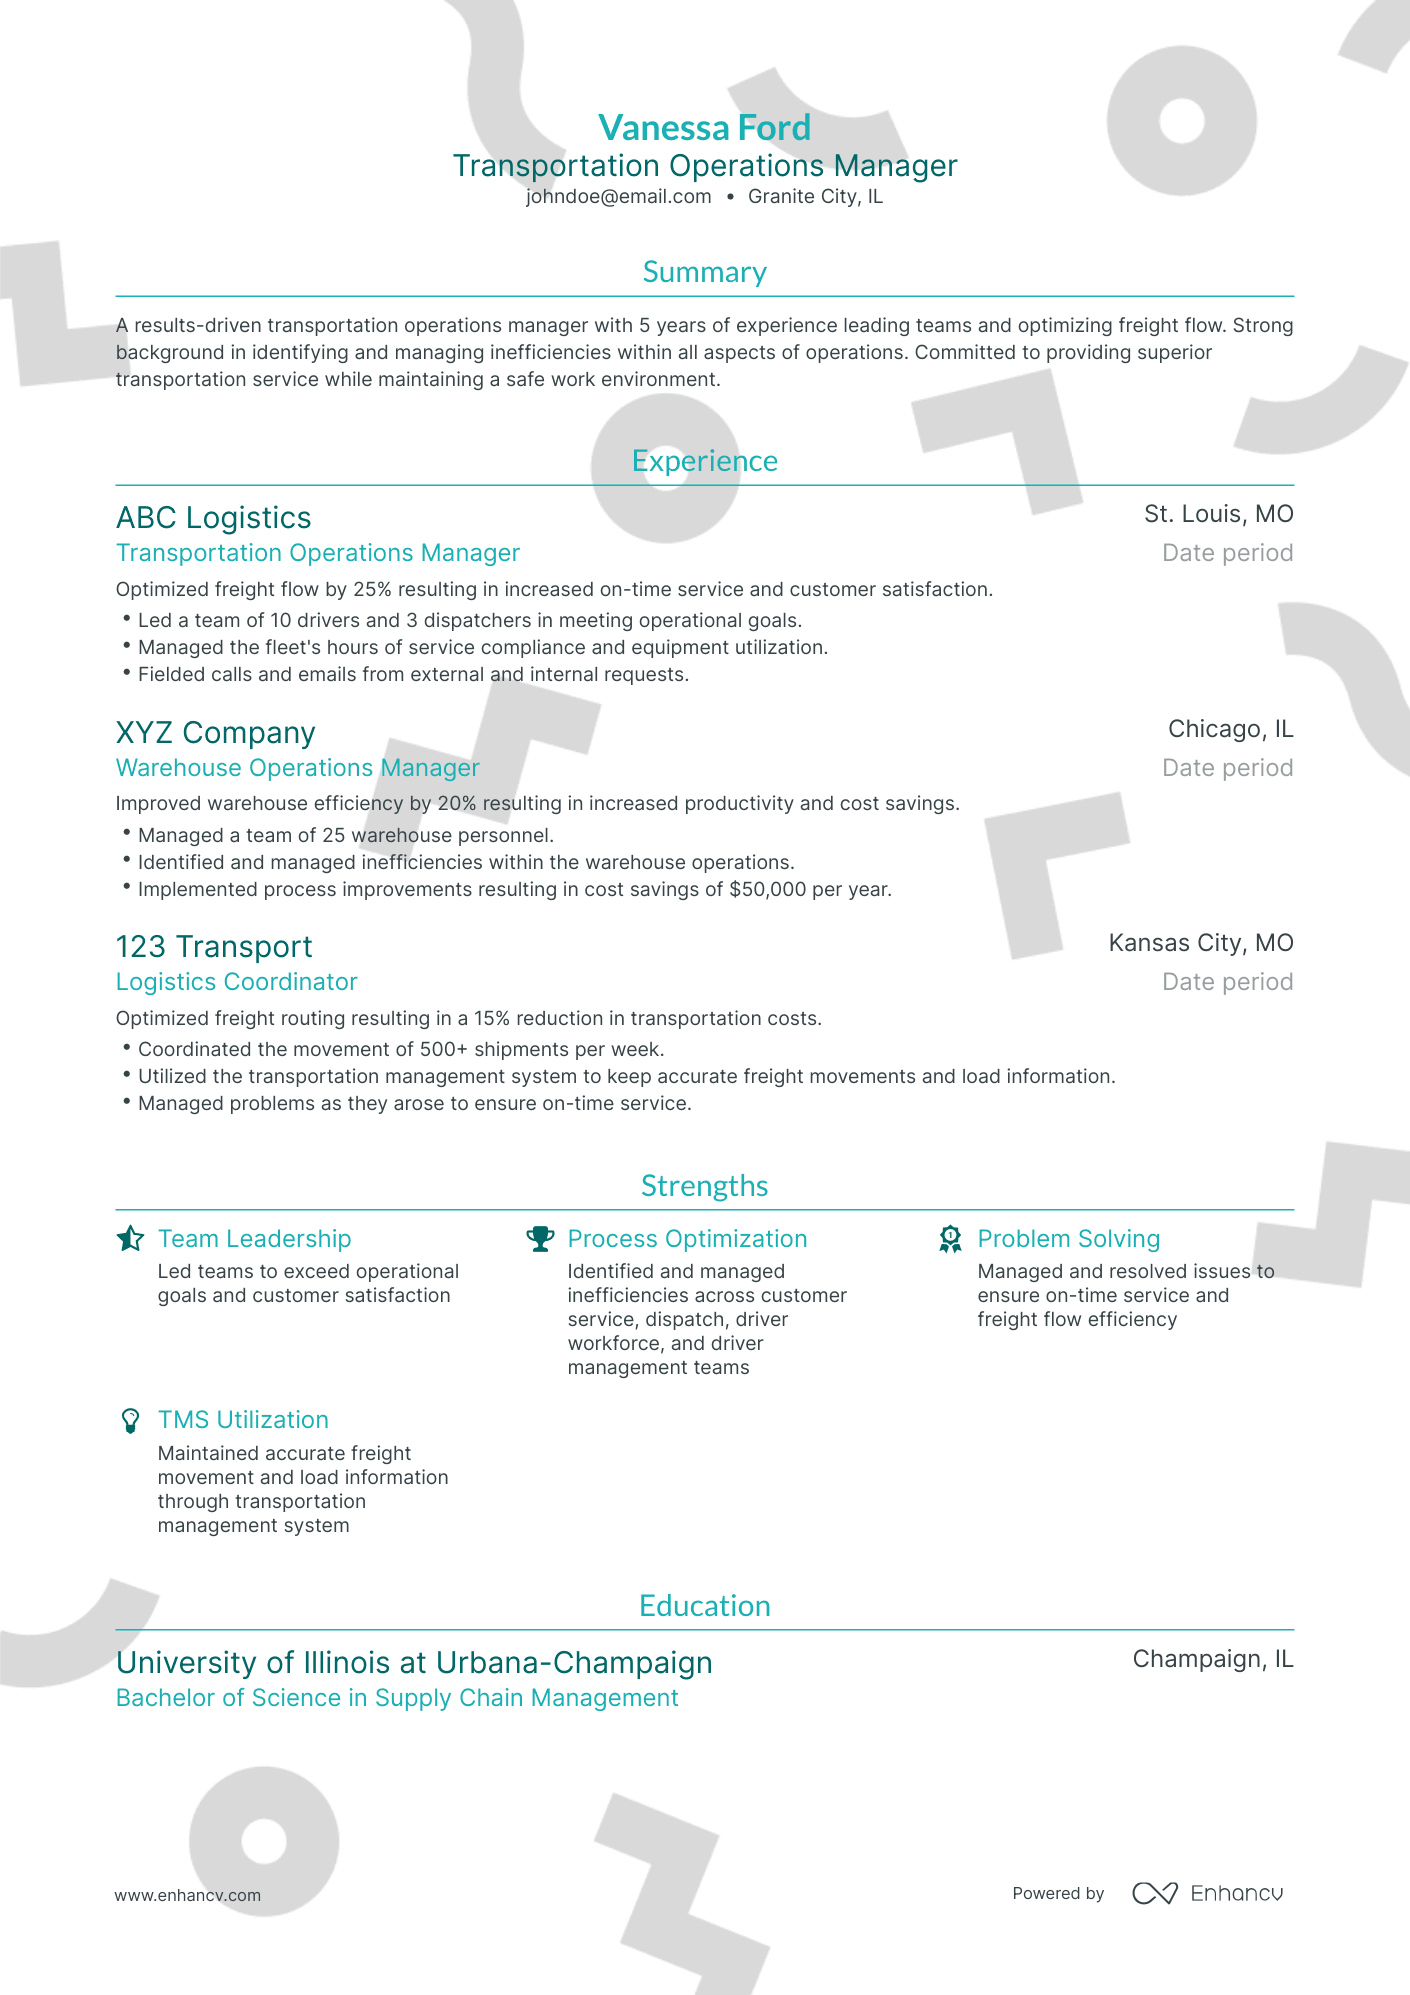 Traditional Transportation Operations Manager Resume Template